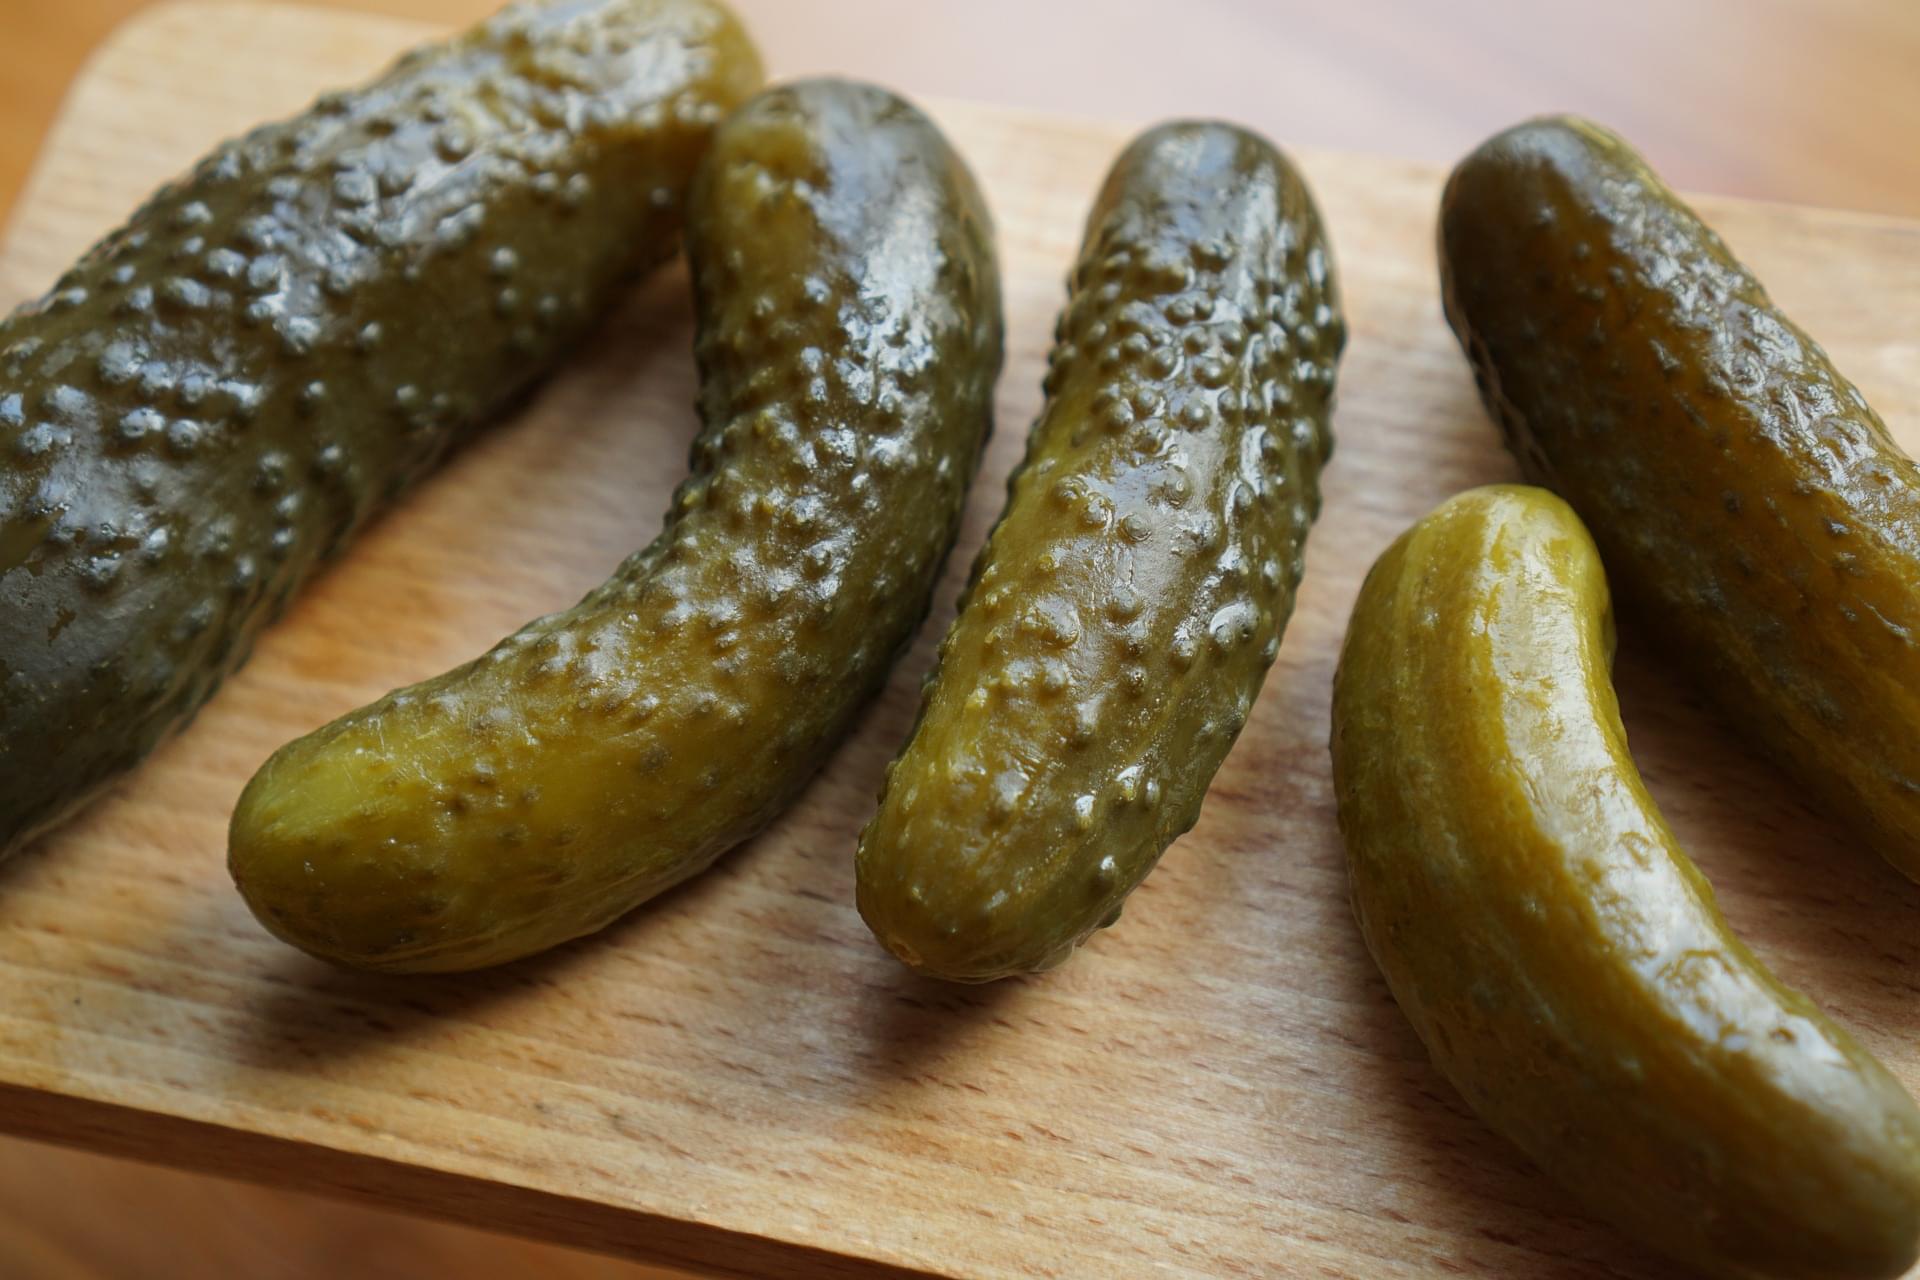 Sandwich Shop Ditches Bread For New Viral Pickle Sandwiches [PHOTO]